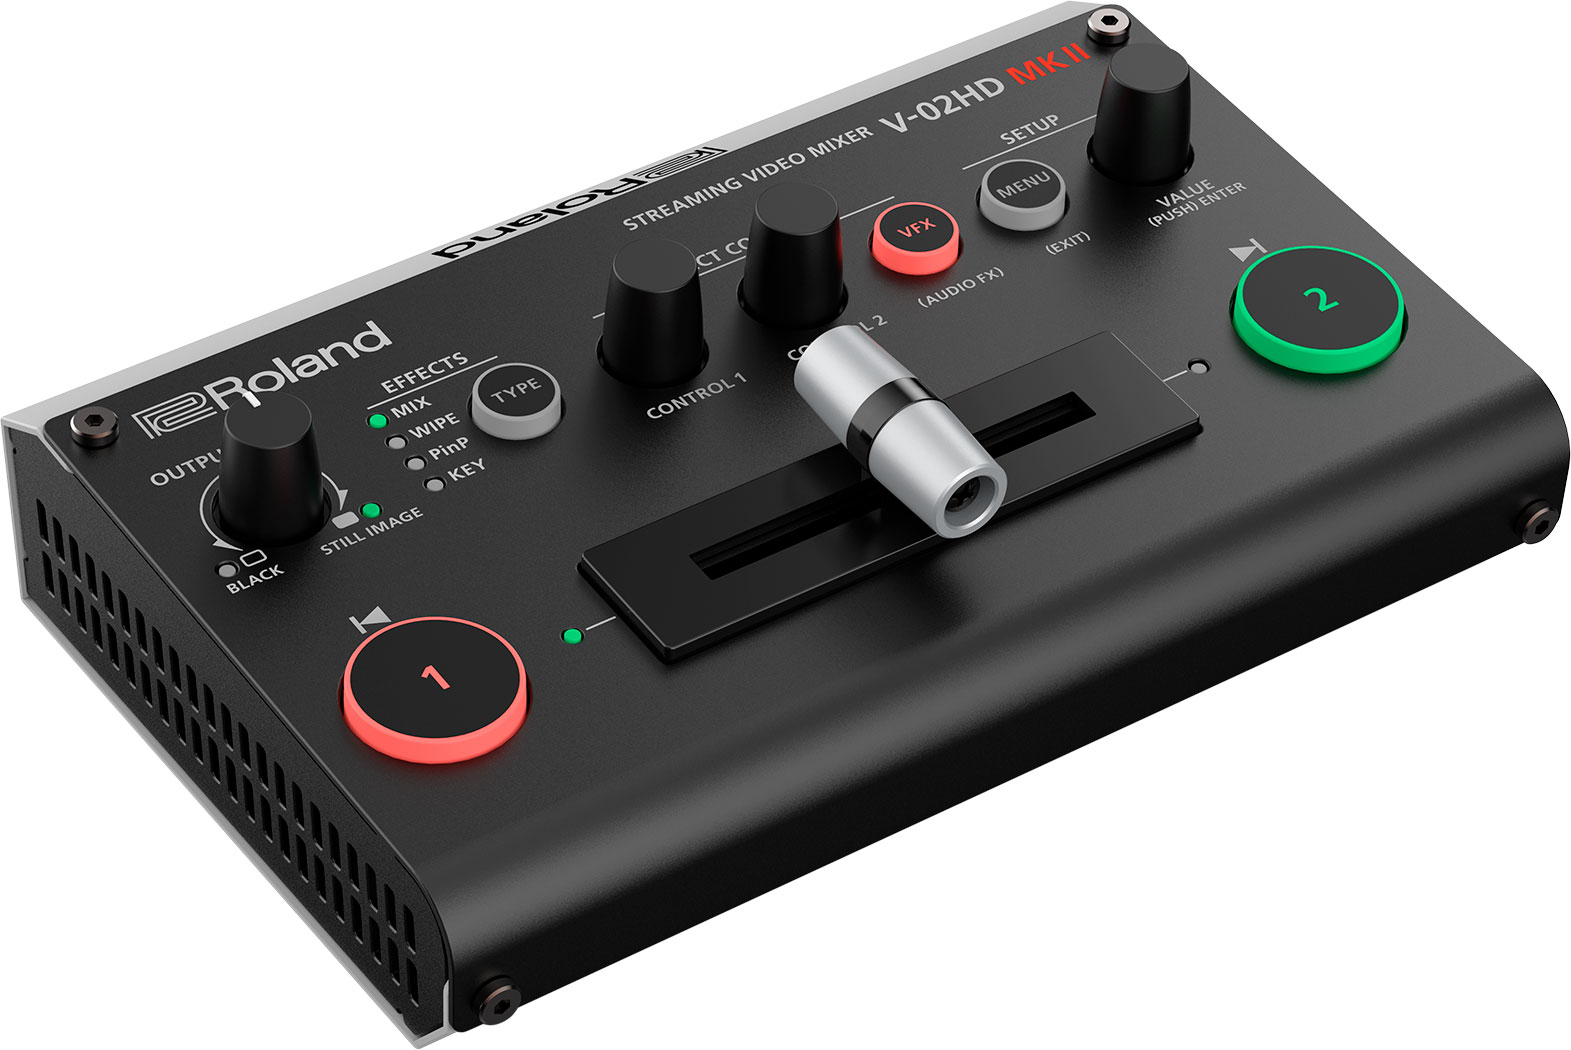 Micro AMP 2 mkII - Waves system